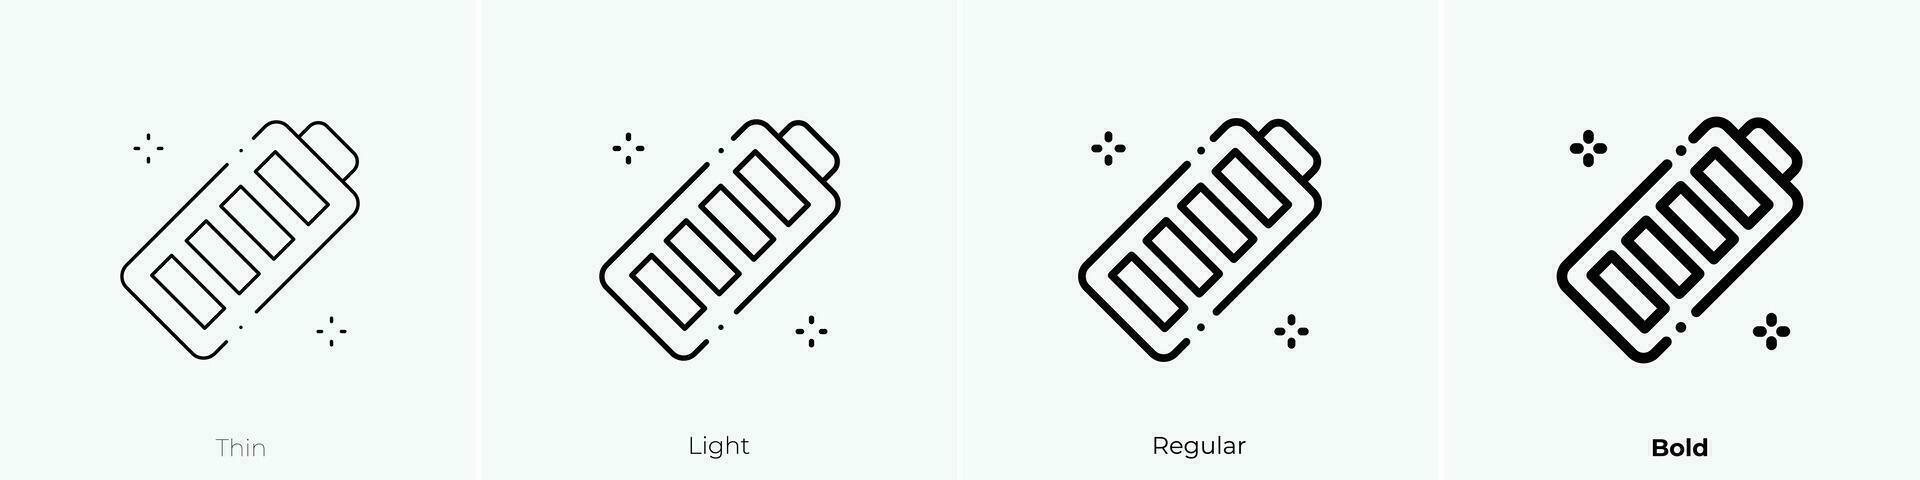 status icon. Thin, Light, Regular And Bold style design isolated on white background vector